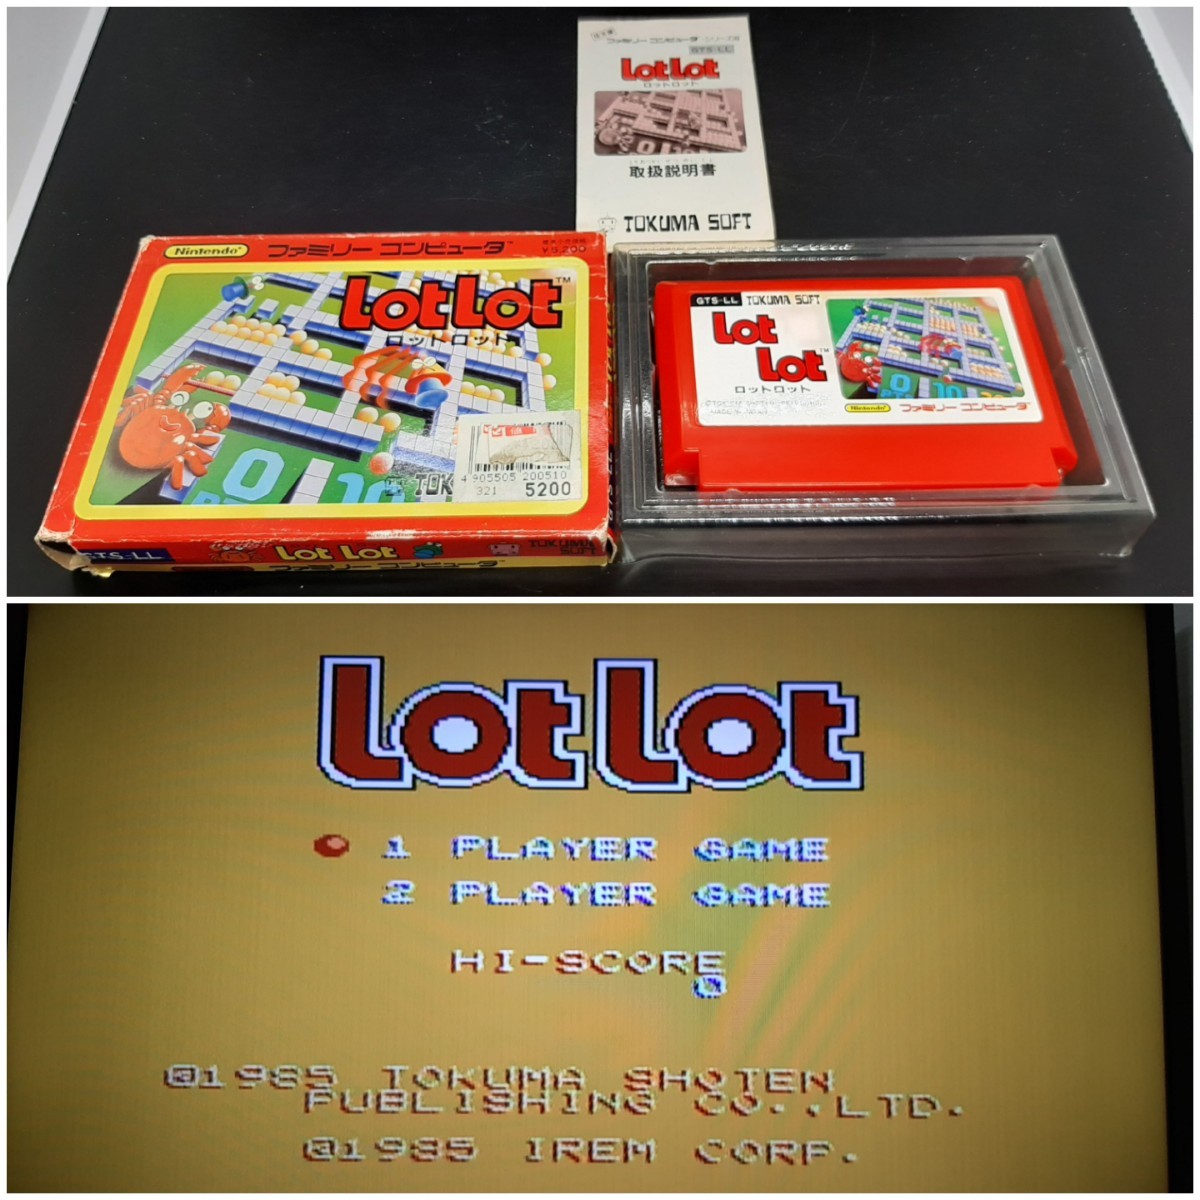 LotLot Rod [ operation verification ending ] Famicom FC right 1 step box attaching [ including in a package possibility ] case soft rare rare cassette game valuable Showa Retro 